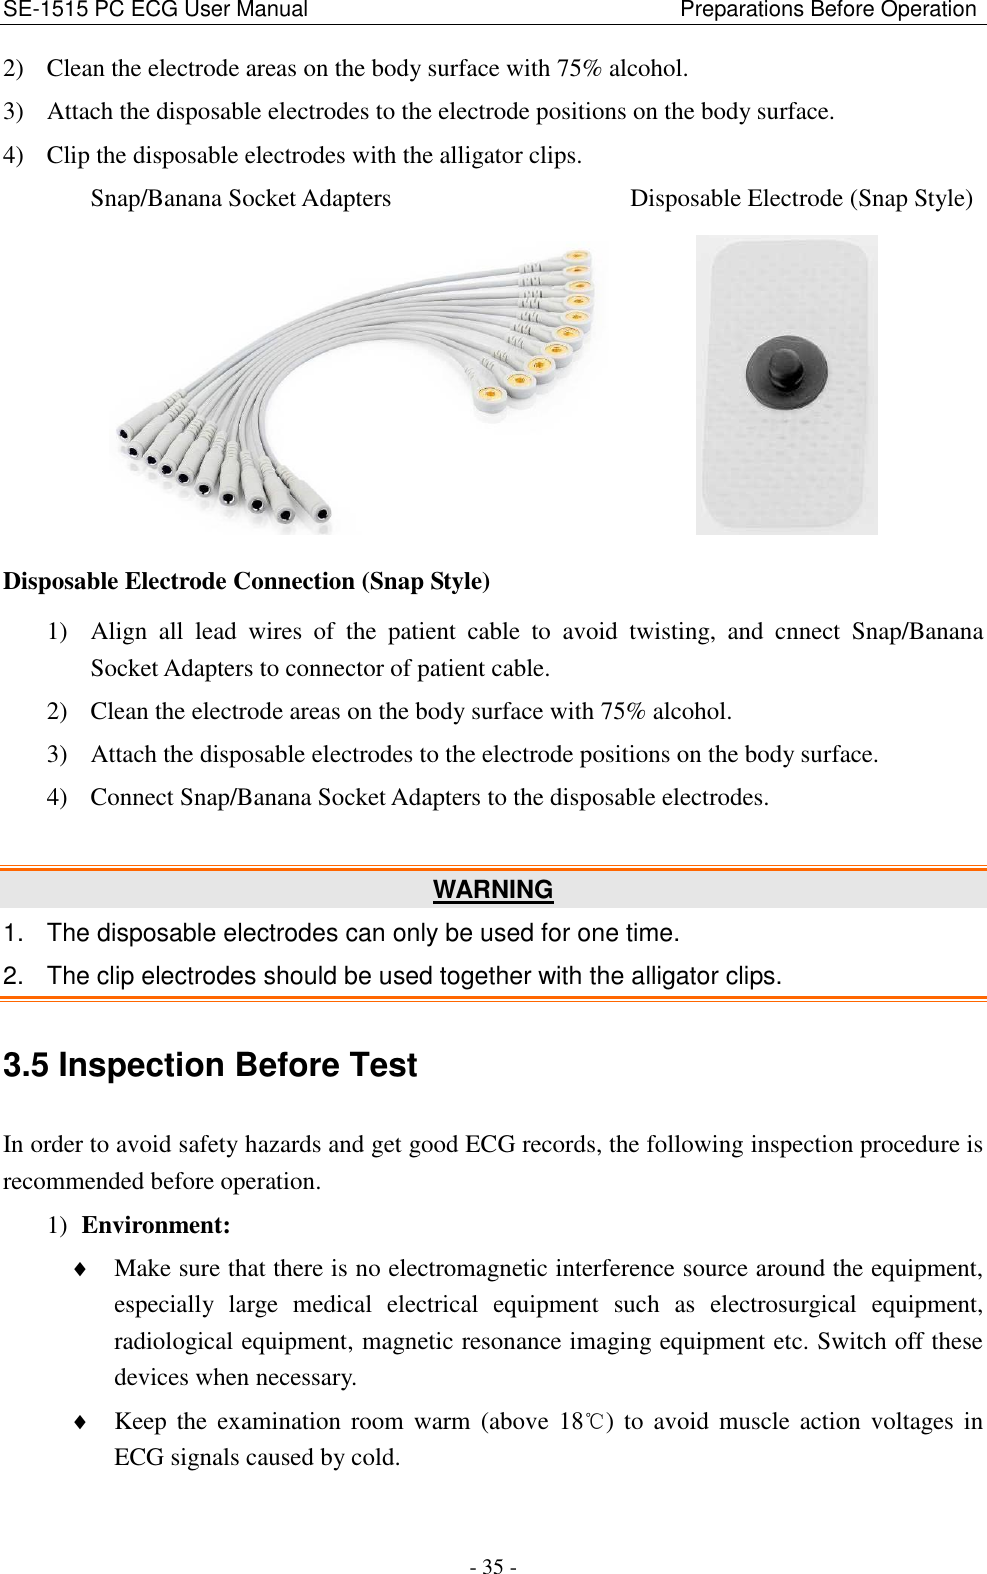 SE-1515 PC ECG User Manual                                                                    Preparations Before Operation - 35 - 2) Clean the electrode areas on the body surface with 75% alcohol. 3) Attach the disposable electrodes to the electrode positions on the body surface. 4) Clip the disposable electrodes with the alligator clips. Snap/Banana Socket Adapters                    Disposable Electrode (Snap Style)          Disposable Electrode Connection (Snap Style) 1) Align  all  lead  wires  of  the  patient  cable  to  avoid  twisting,  and  cnnect  Snap/Banana Socket Adapters to connector of patient cable. 2) Clean the electrode areas on the body surface with 75% alcohol. 3) Attach the disposable electrodes to the electrode positions on the body surface. 4) Connect Snap/Banana Socket Adapters to the disposable electrodes.    WARNING 1.  The disposable electrodes can only be used for one time. 2.  The clip electrodes should be used together with the alligator clips. 3.5 Inspection Before Test In order to avoid safety hazards and get good ECG records, the following inspection procedure is recommended before operation. 1) Environment:  Make sure that there is no electromagnetic interference source around the equipment, especially  large  medical  electrical  equipment  such  as  electrosurgical  equipment, radiological equipment, magnetic resonance imaging equipment etc. Switch off these devices when necessary.  Keep the  examination  room  warm  (above  18℃)  to  avoid  muscle  action  voltages in ECG signals caused by cold. 